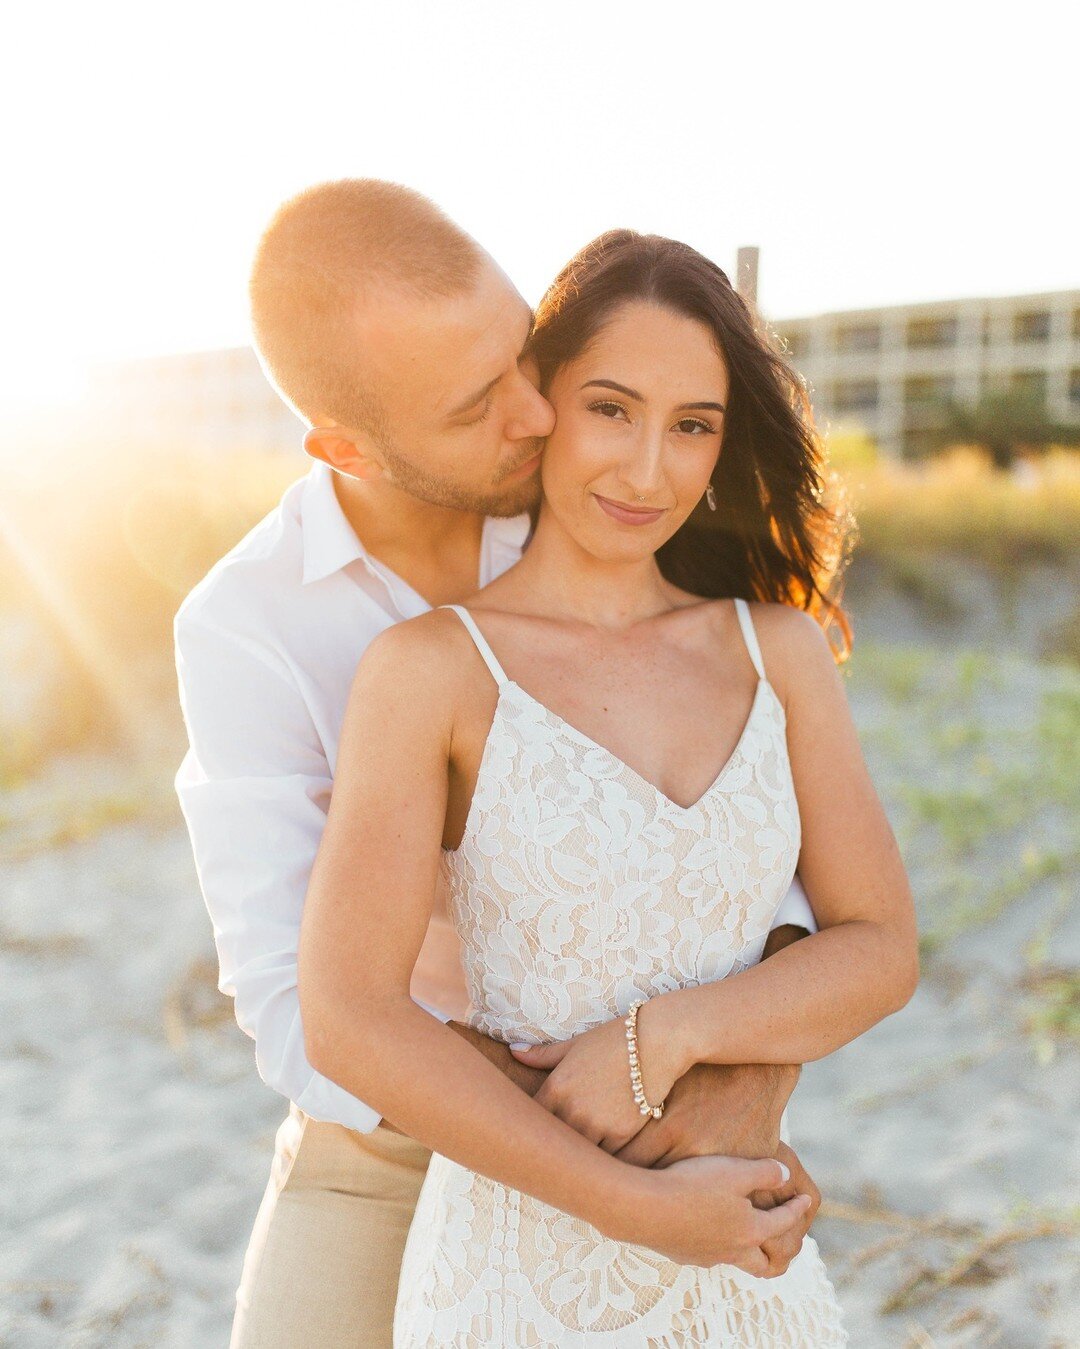 The sun made a special appearance during this beautiful beach elopement 😍📸

#charlestonelopement #charlestonelopements #charlestonelopementpackages #charlestonelopementphotography #charlestonelopementphotographer #sunnyphotography #charlestonsc #be